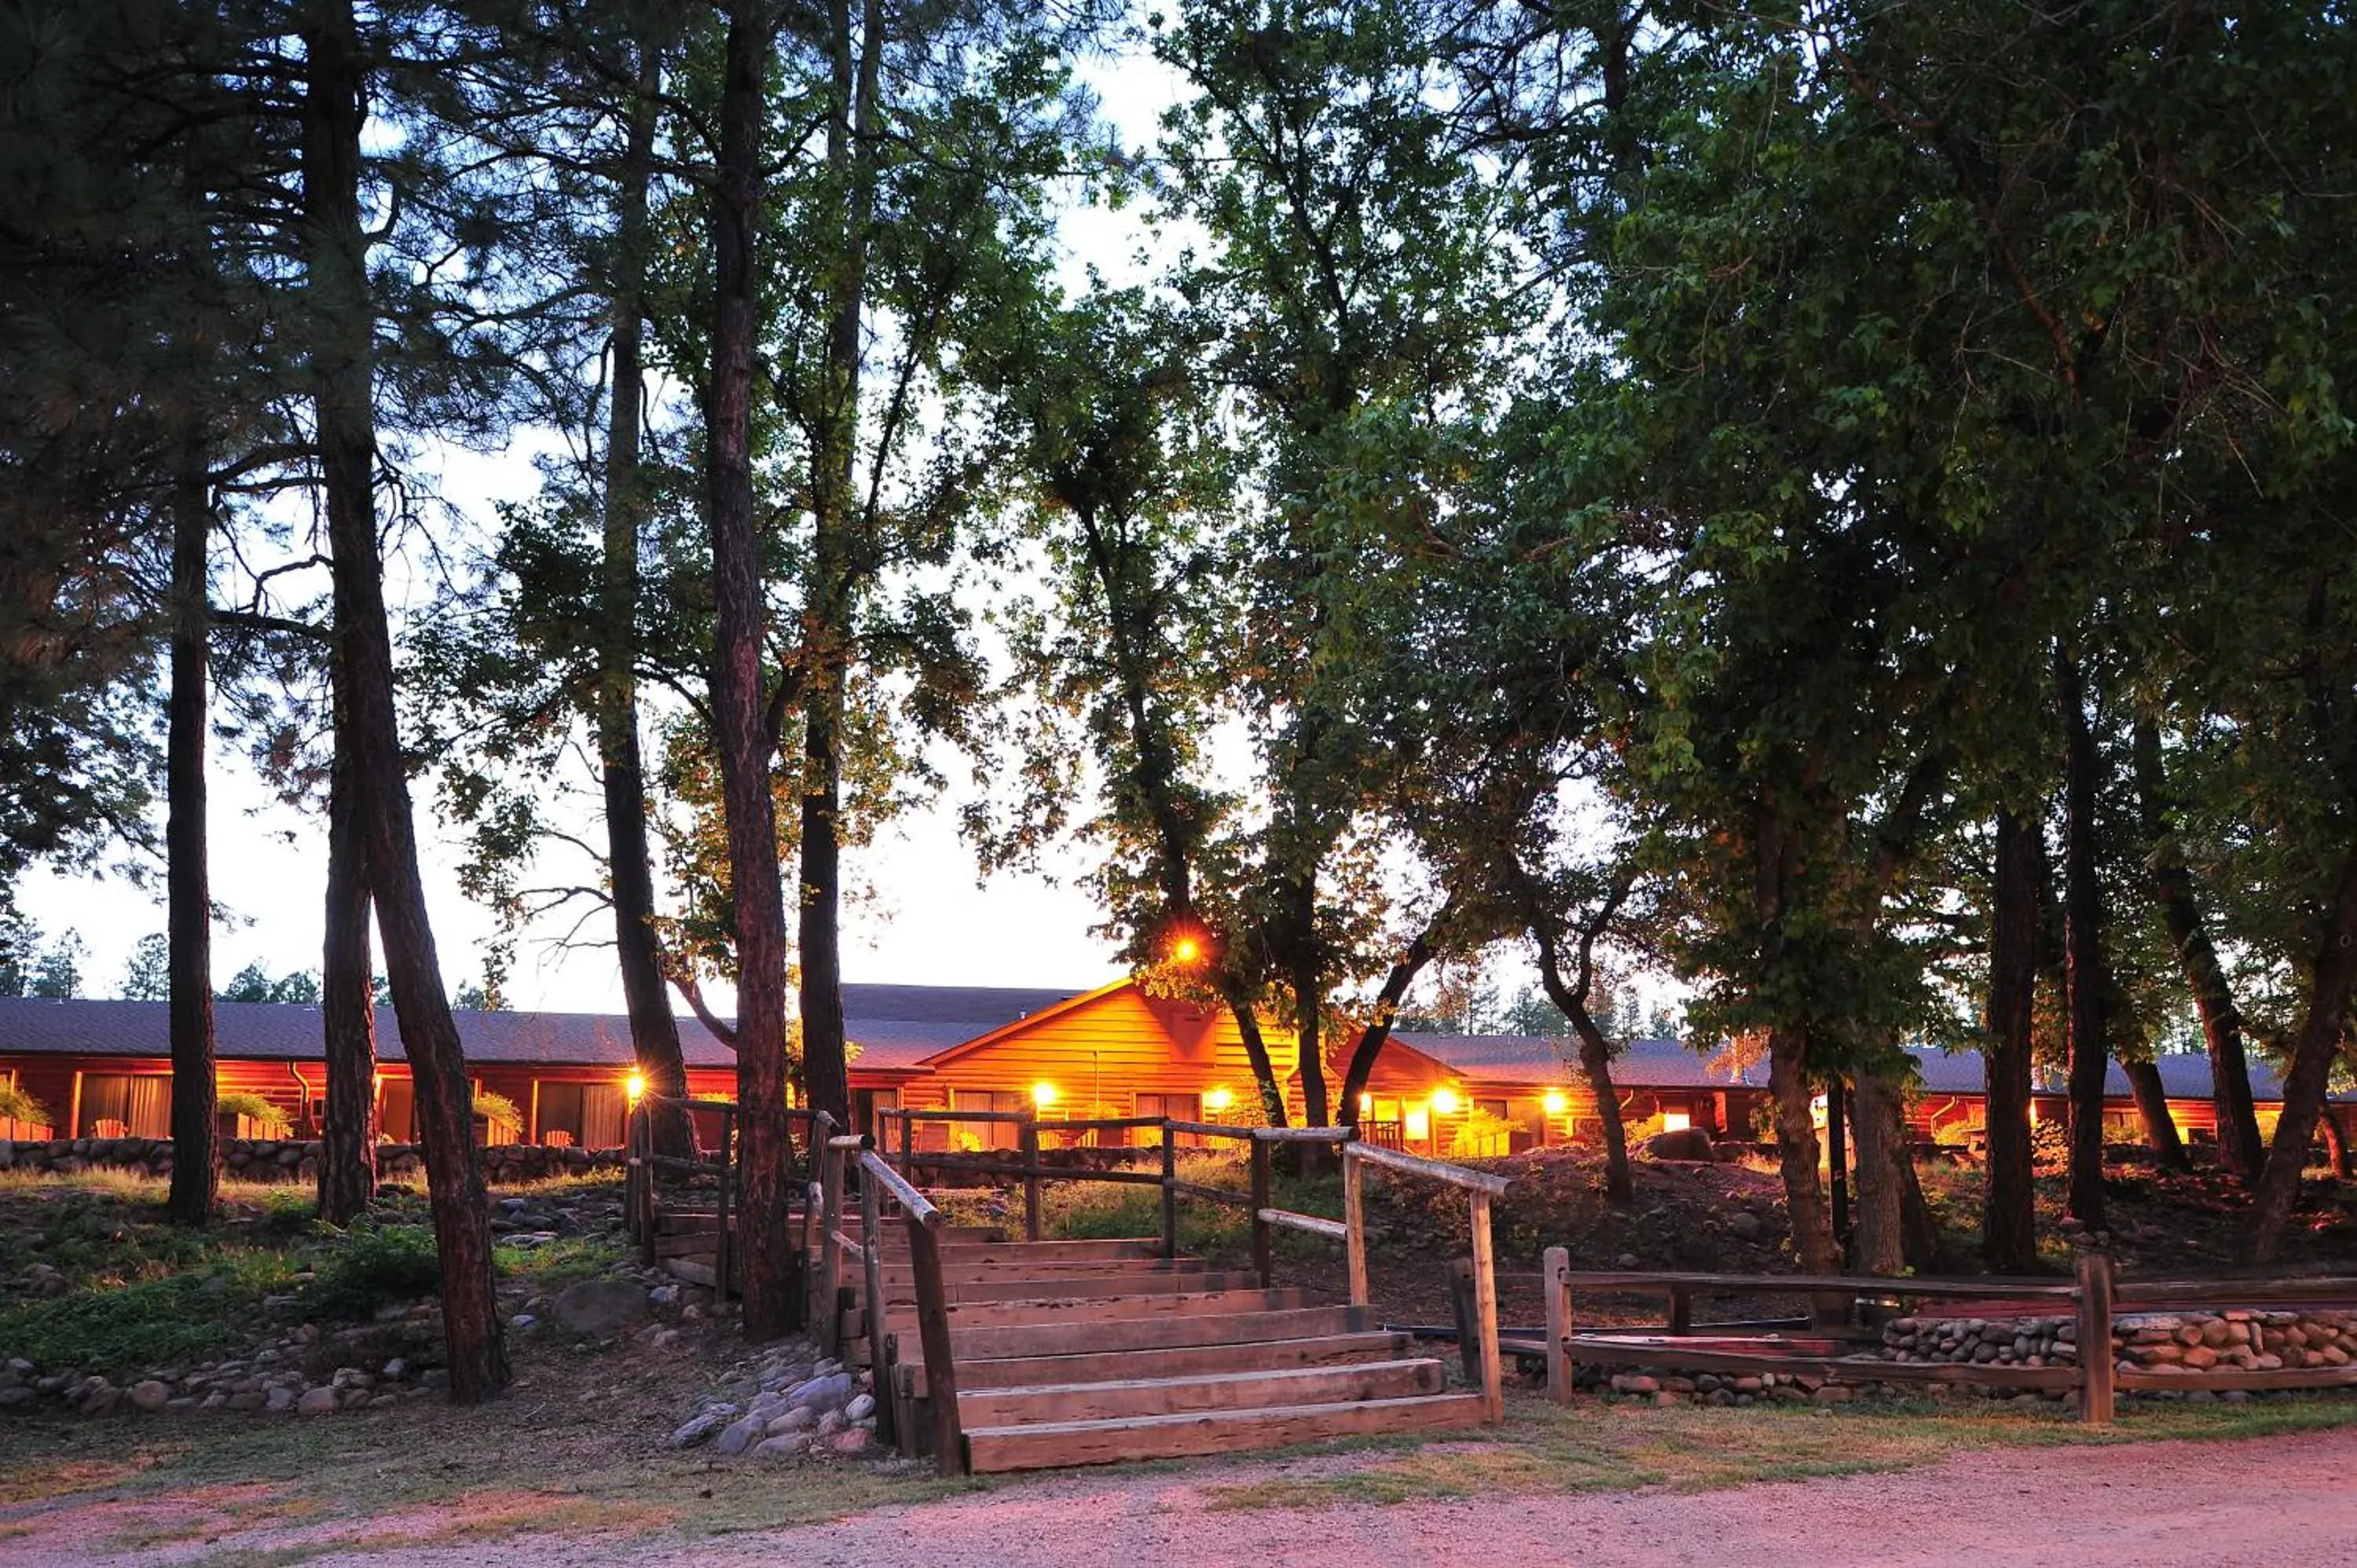 Property building in Kohl's Ranch Lodge